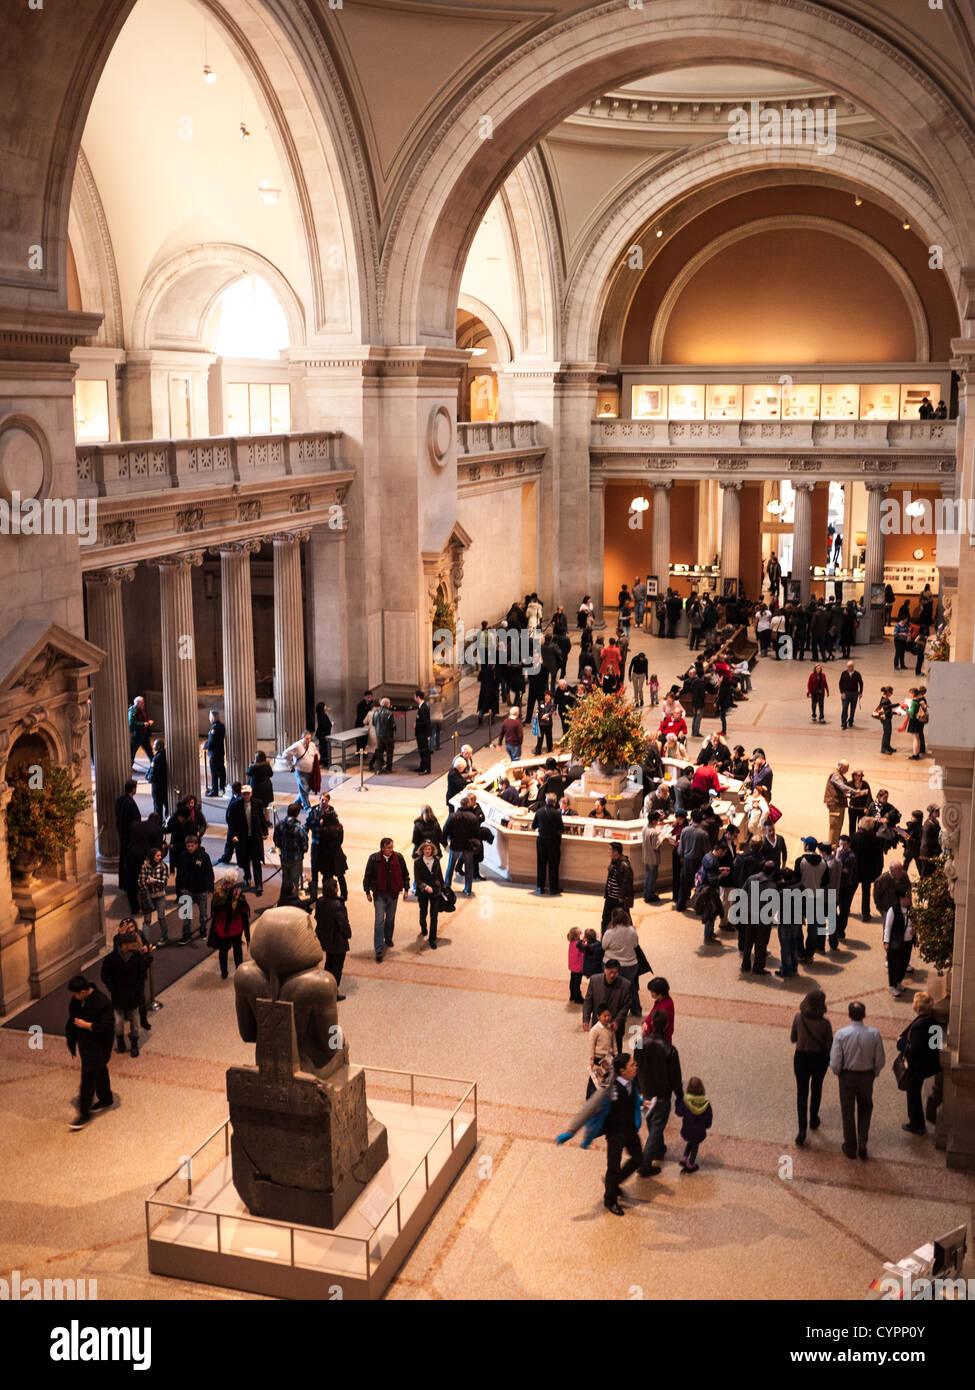 NEW YORK, NY - Crowds of visitors at the main entrance hall of the Metropolitan Museum of Art in New York, New York. Stock Photo